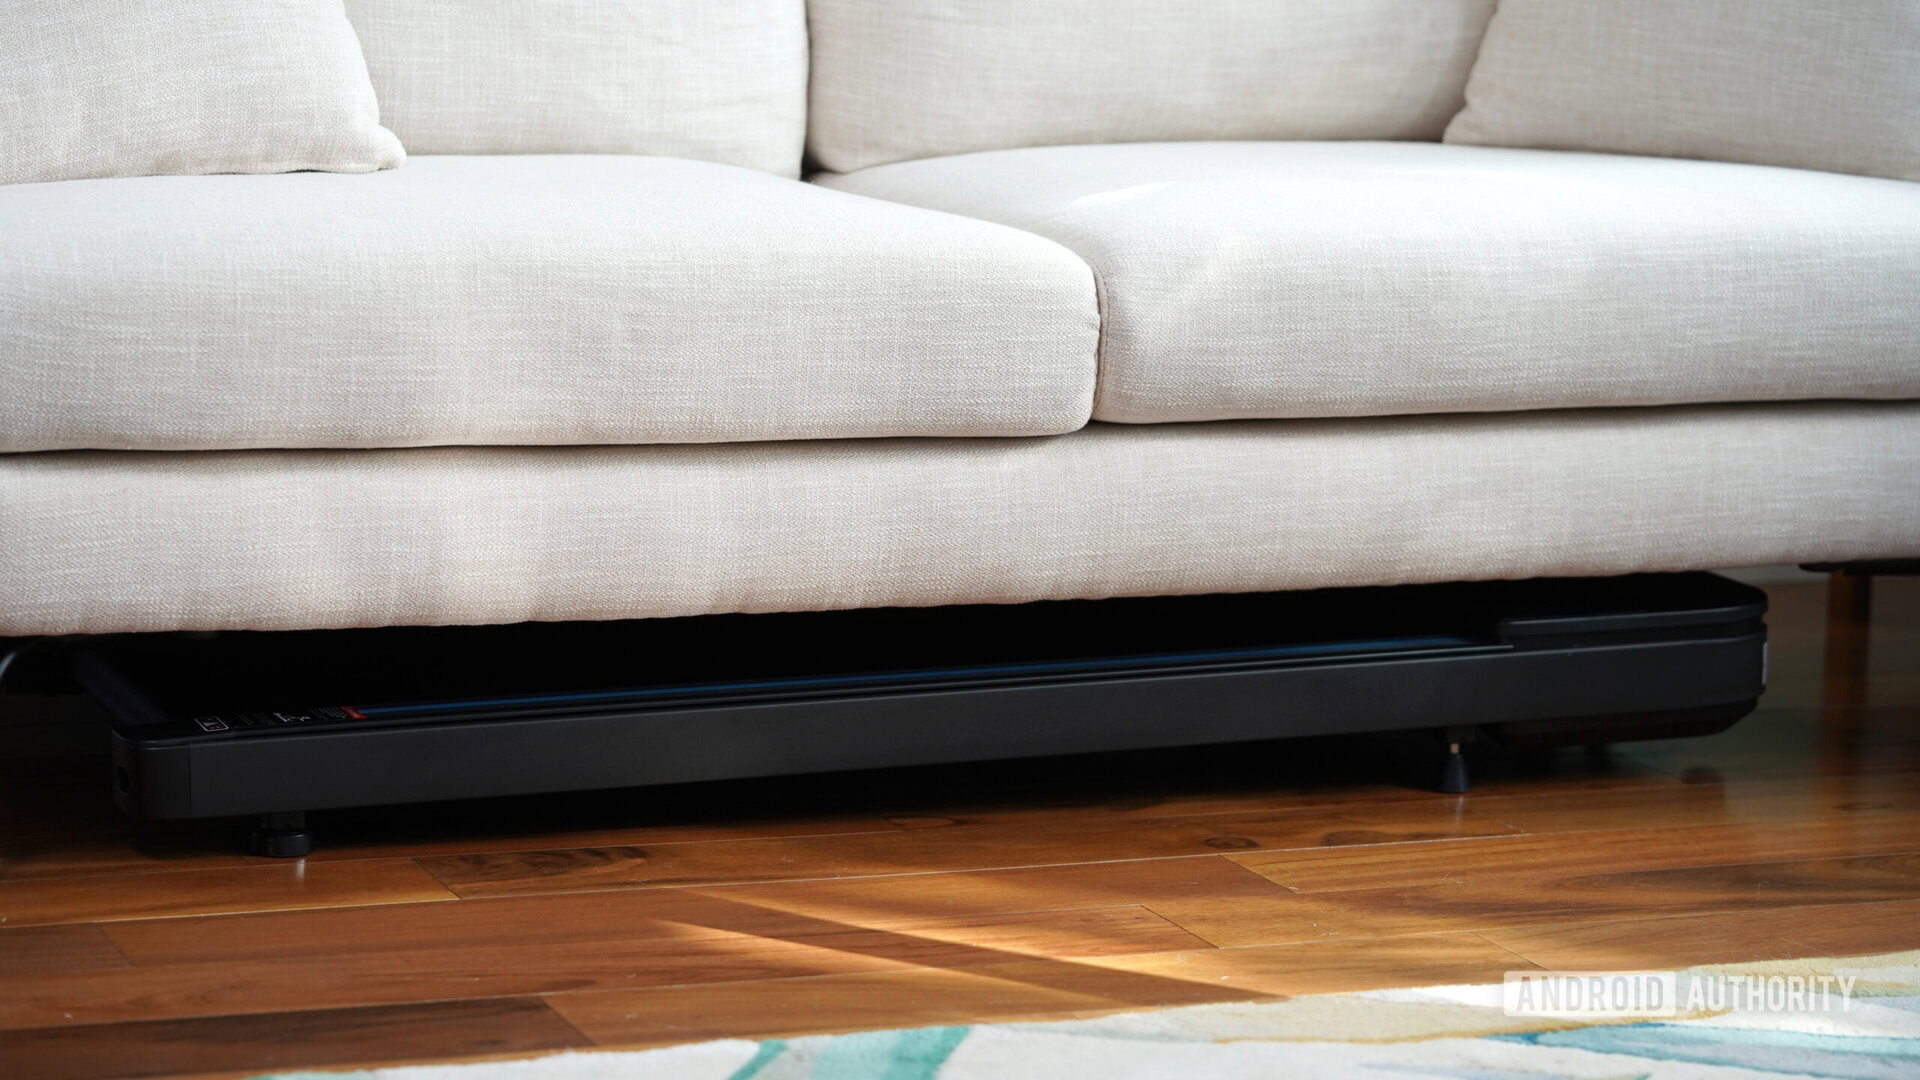 A Mobvoi Home Walking Treadmill is stored under a small couch.